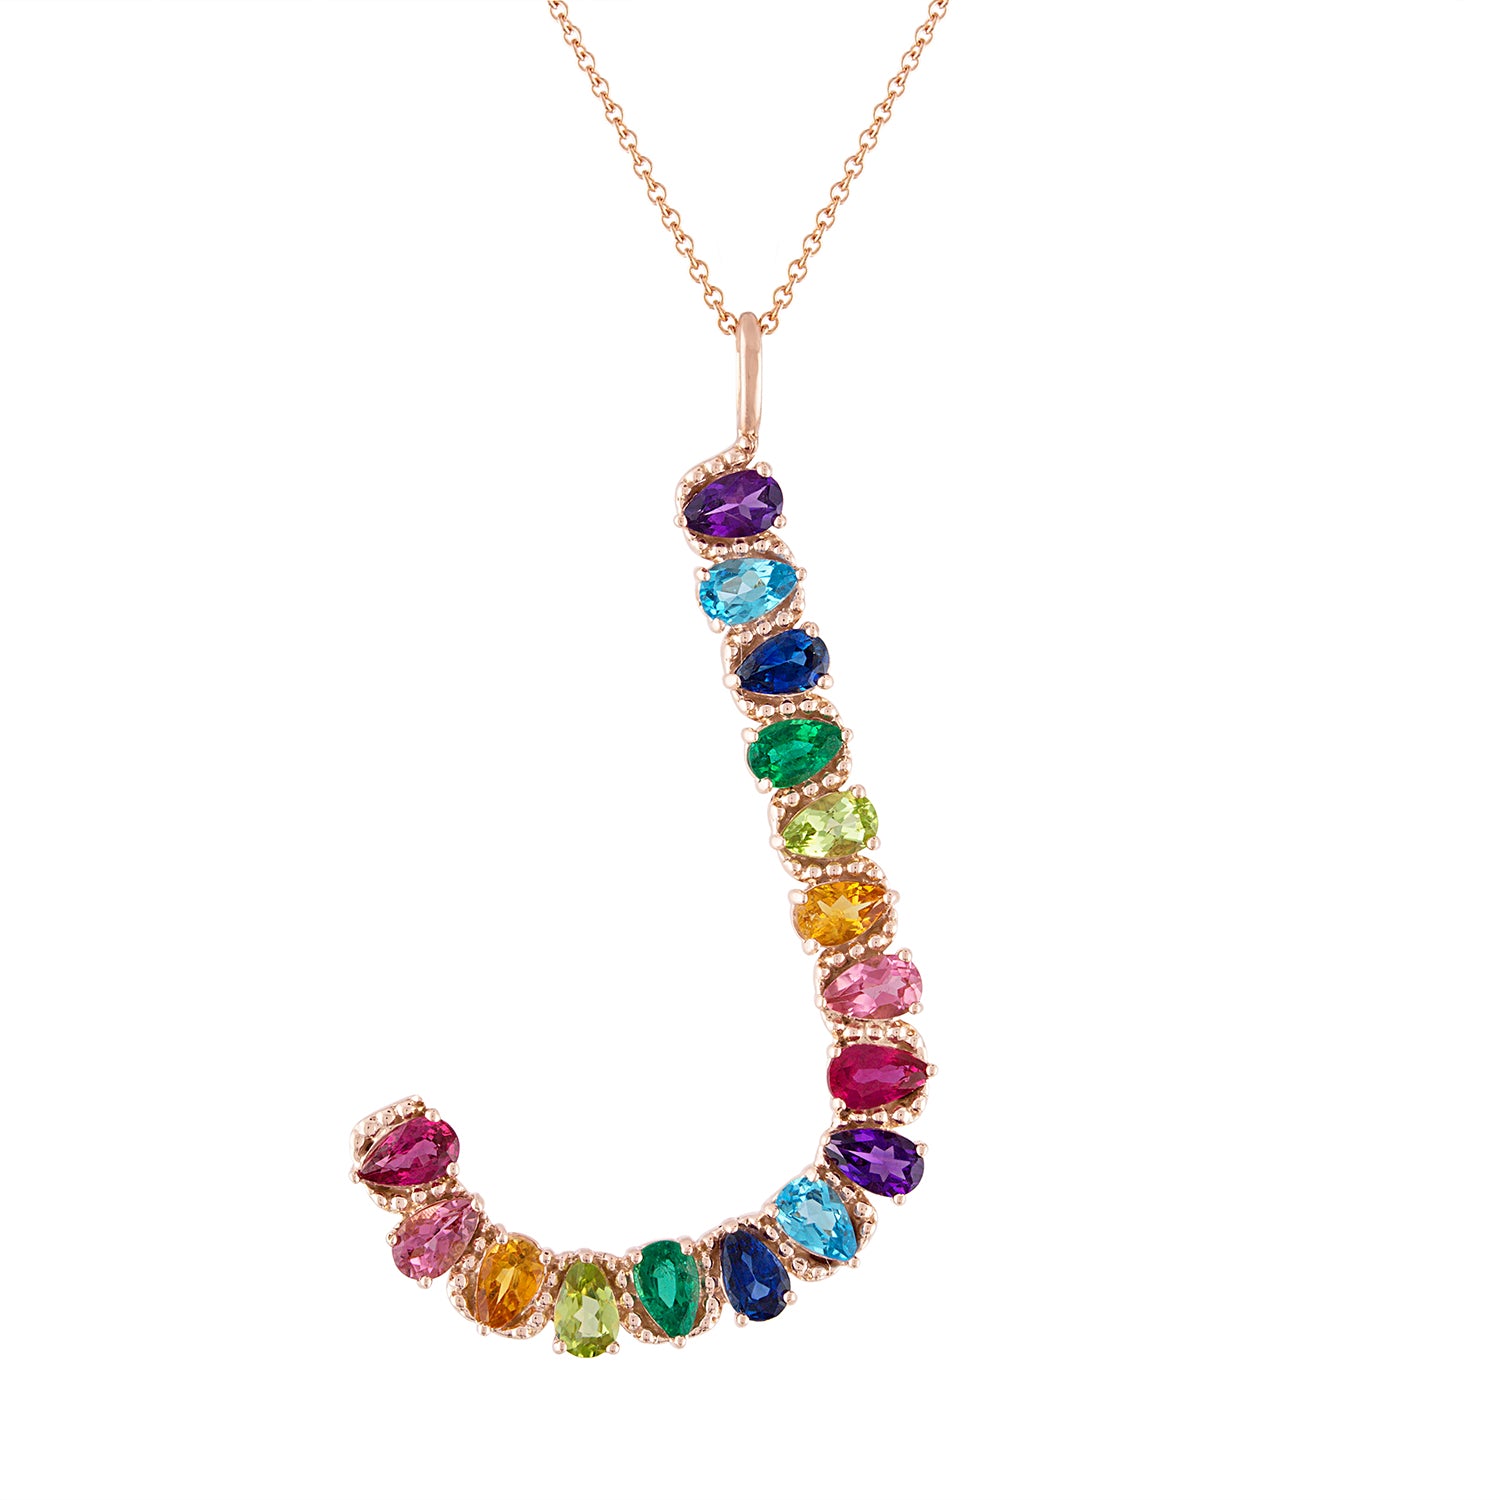 Rose gold jumbo initial necklace with pear shaped multicolor stones.